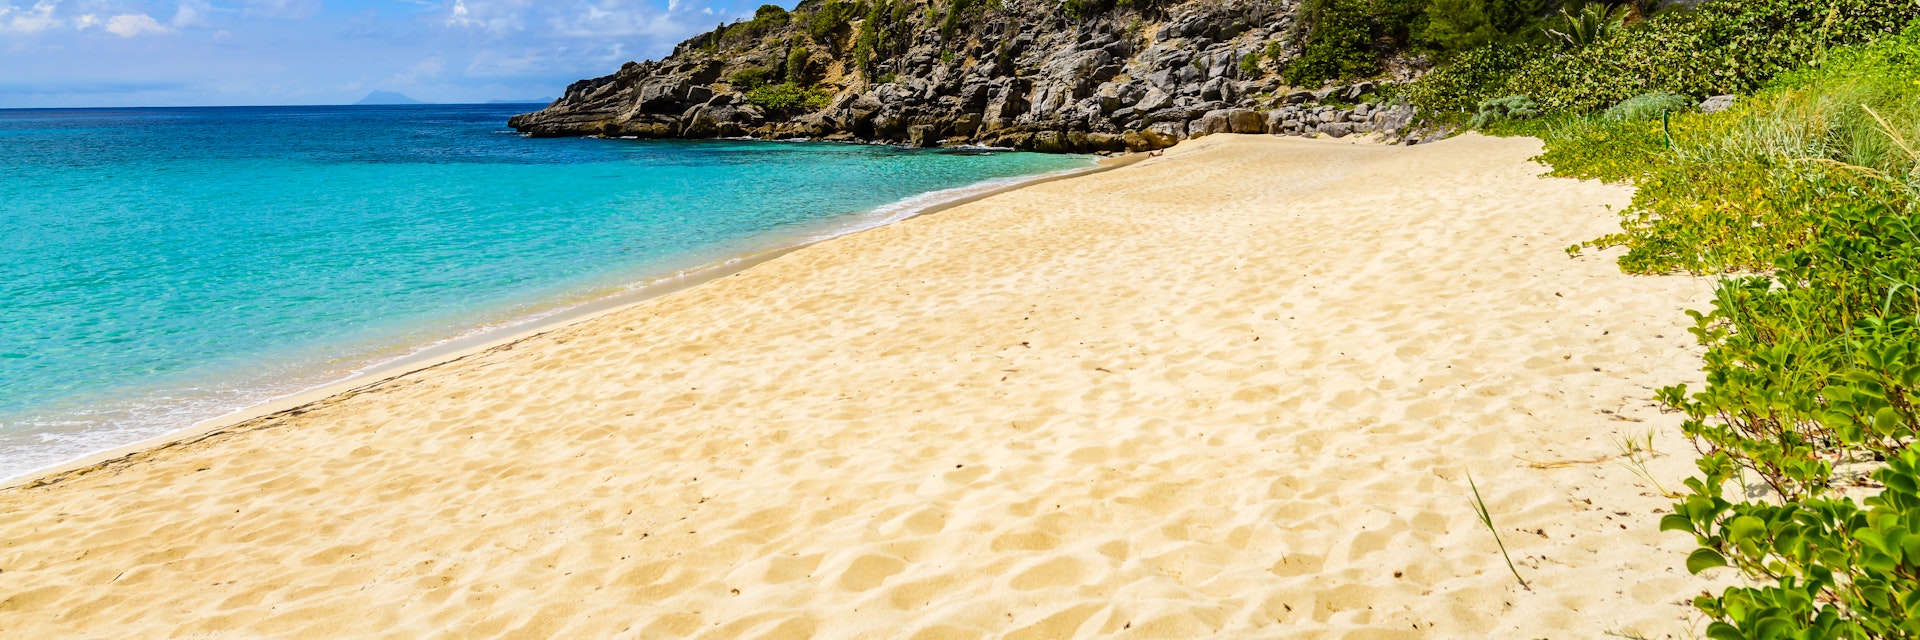 Remote and private Gouverneur Beach on the French Caribbean island of Saint Barthélemy (St Barts.).